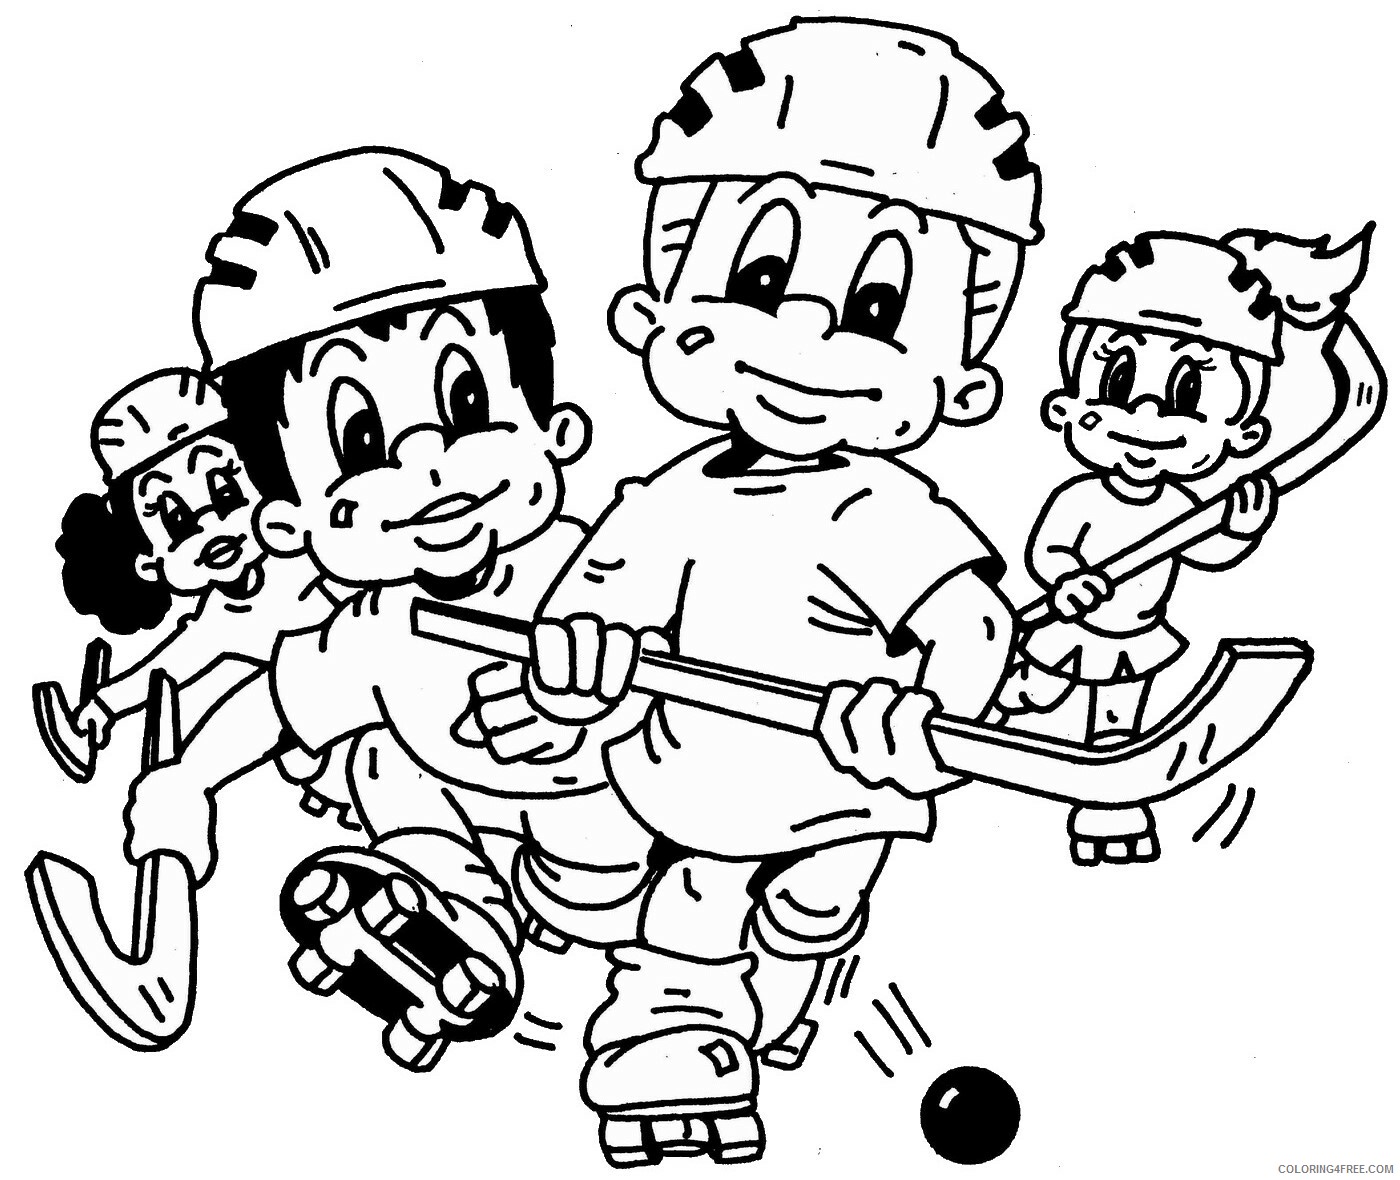 Hockey Coloring Pages hockey_coloring14 Printable 2021 3291 Coloring4free